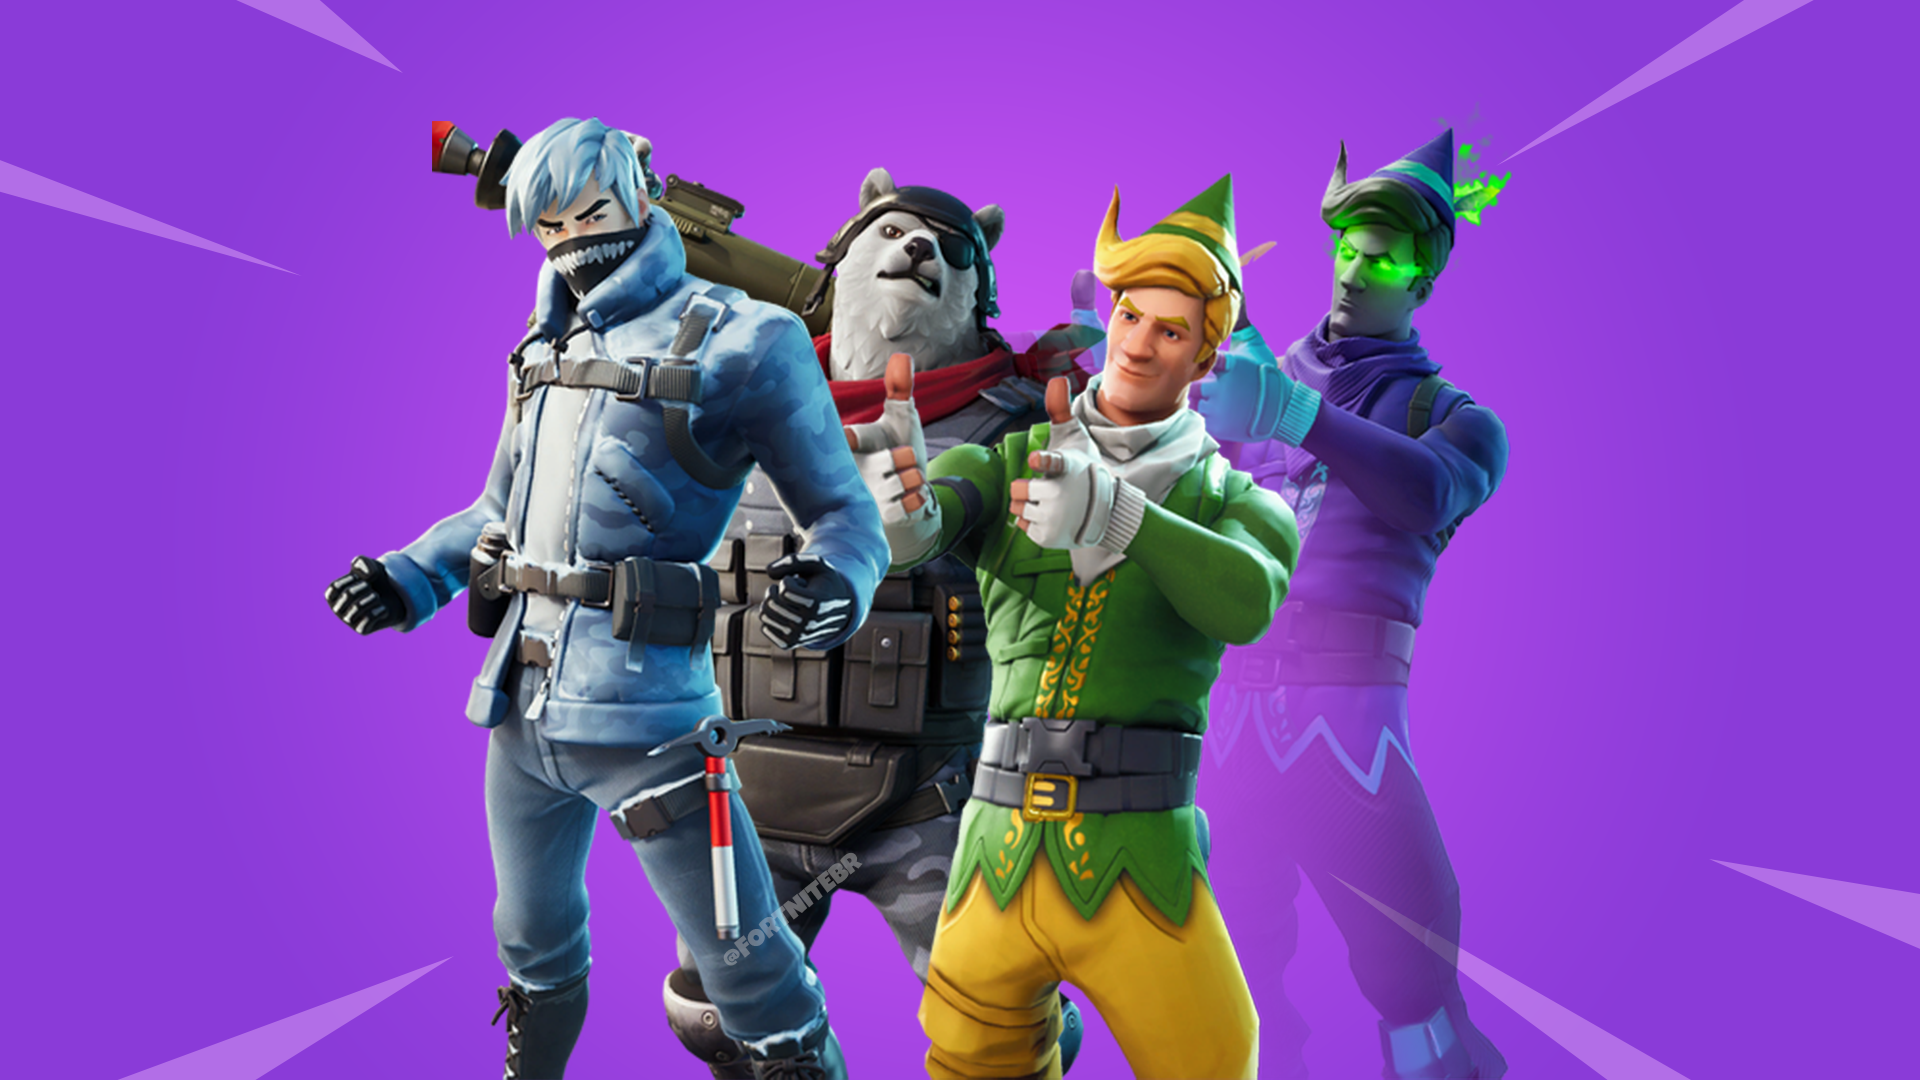 Fortnite Patch v11.30 - All Leaked Cosmetics (Skins, Emotes, Gliders, Wraps)